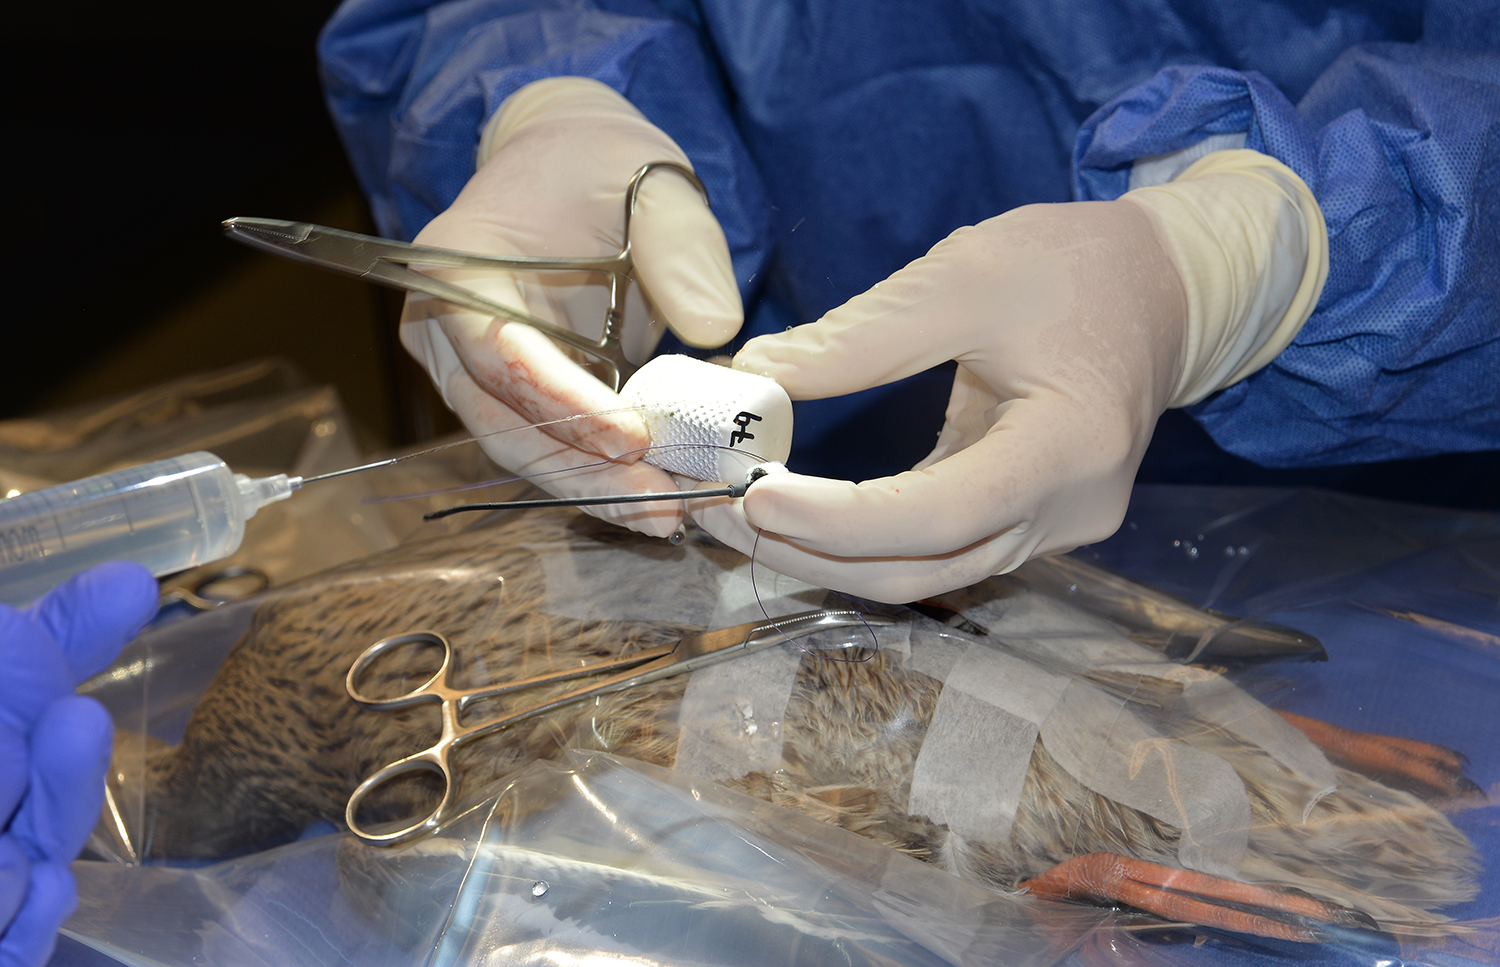 Duck undergoing surgery to implant GPS unit